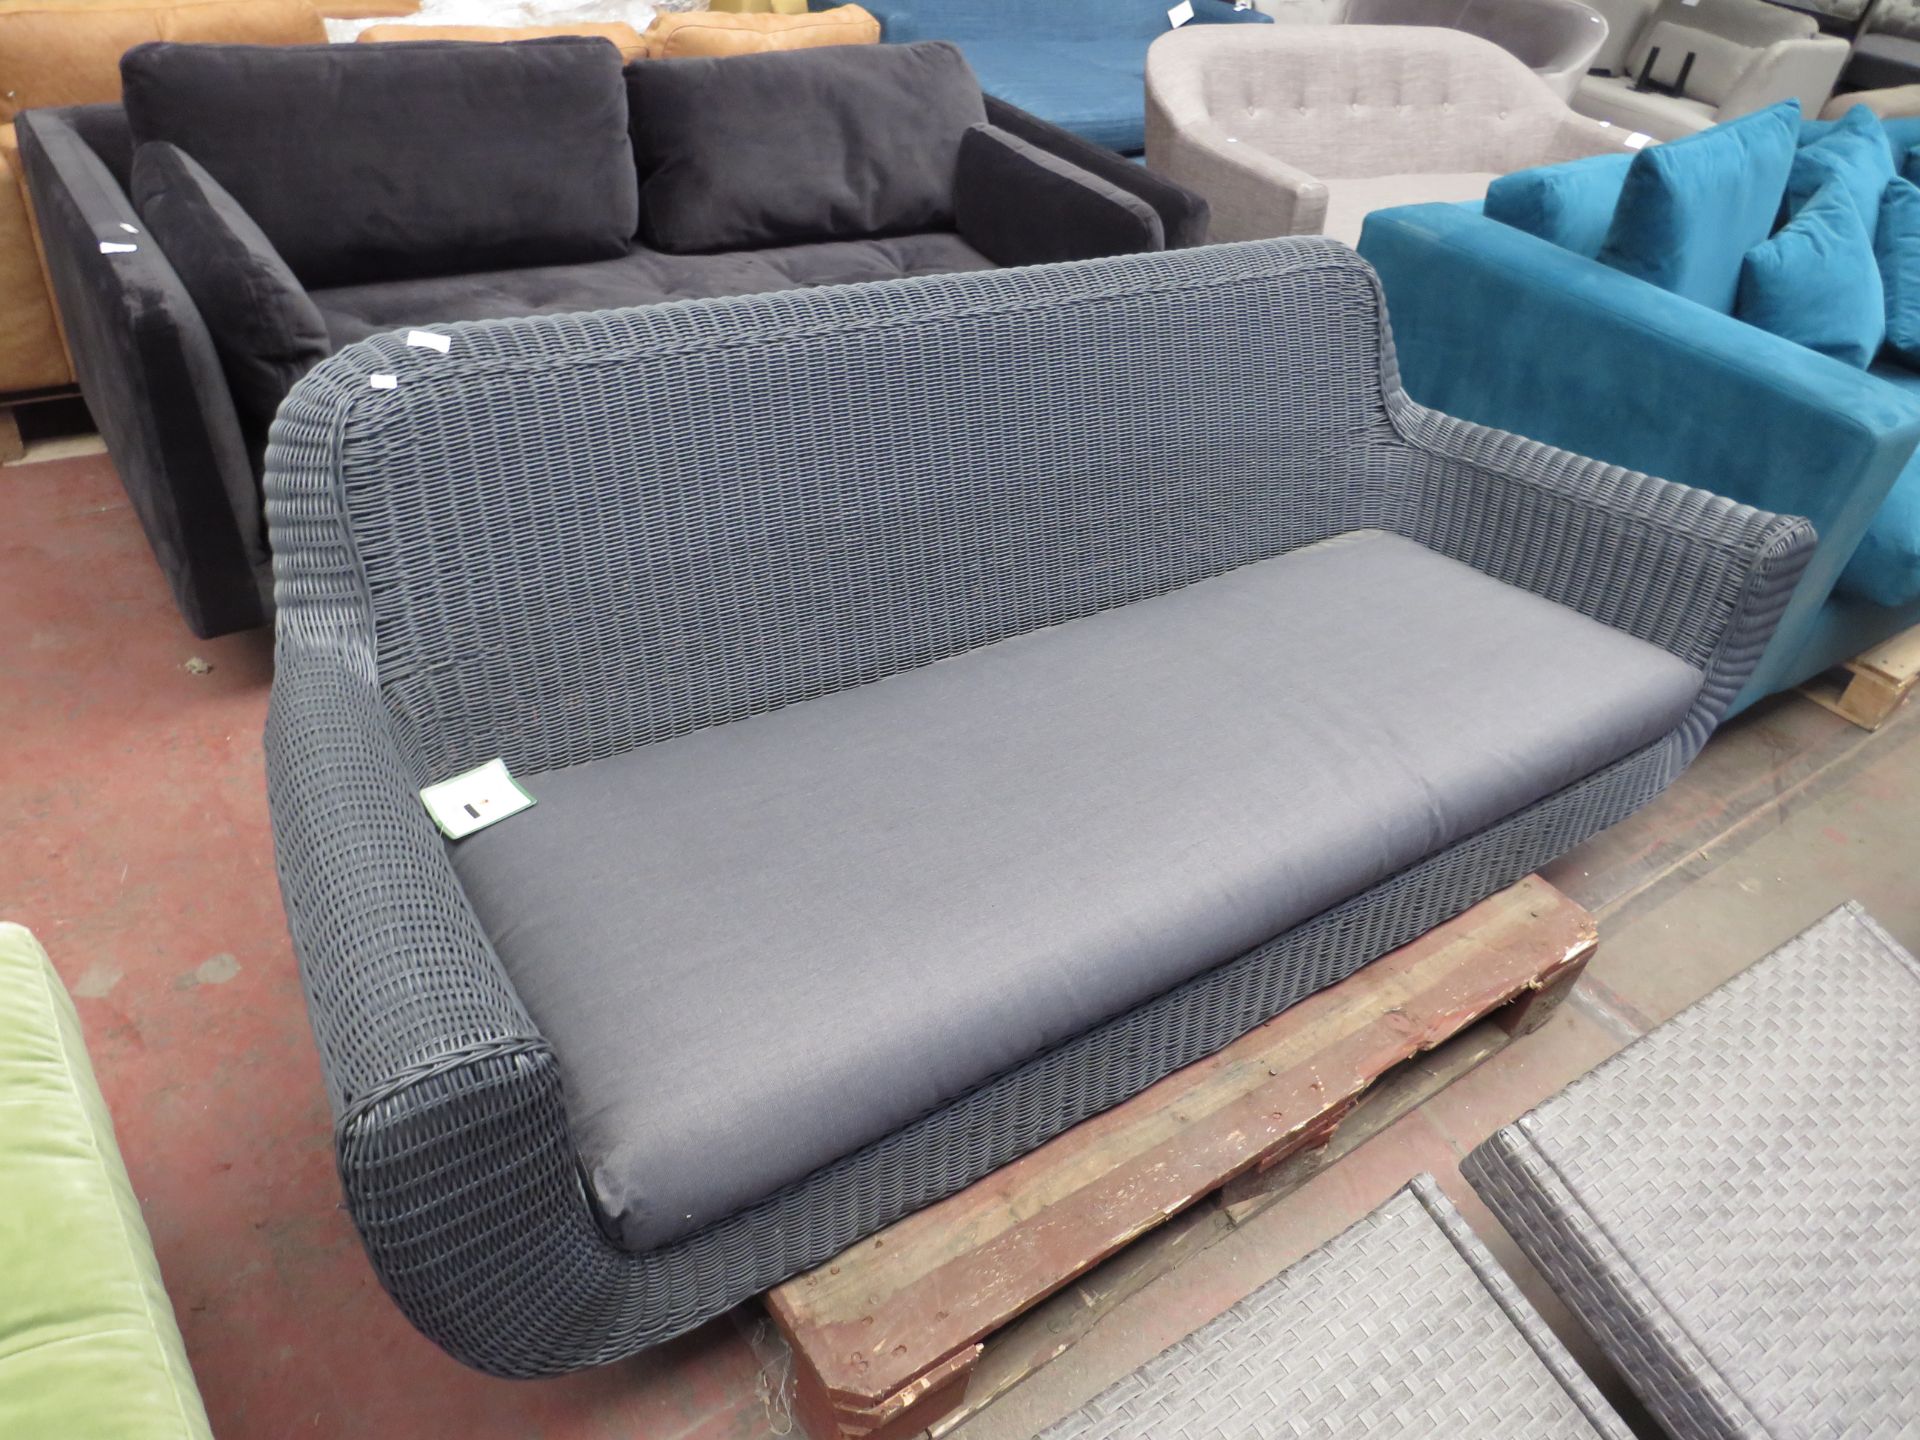 | 1X | MADE.COM GREY RATTAN SOFA WITH CUSHION | no major damage (PLEASE NOTE, THIS DOES NOT